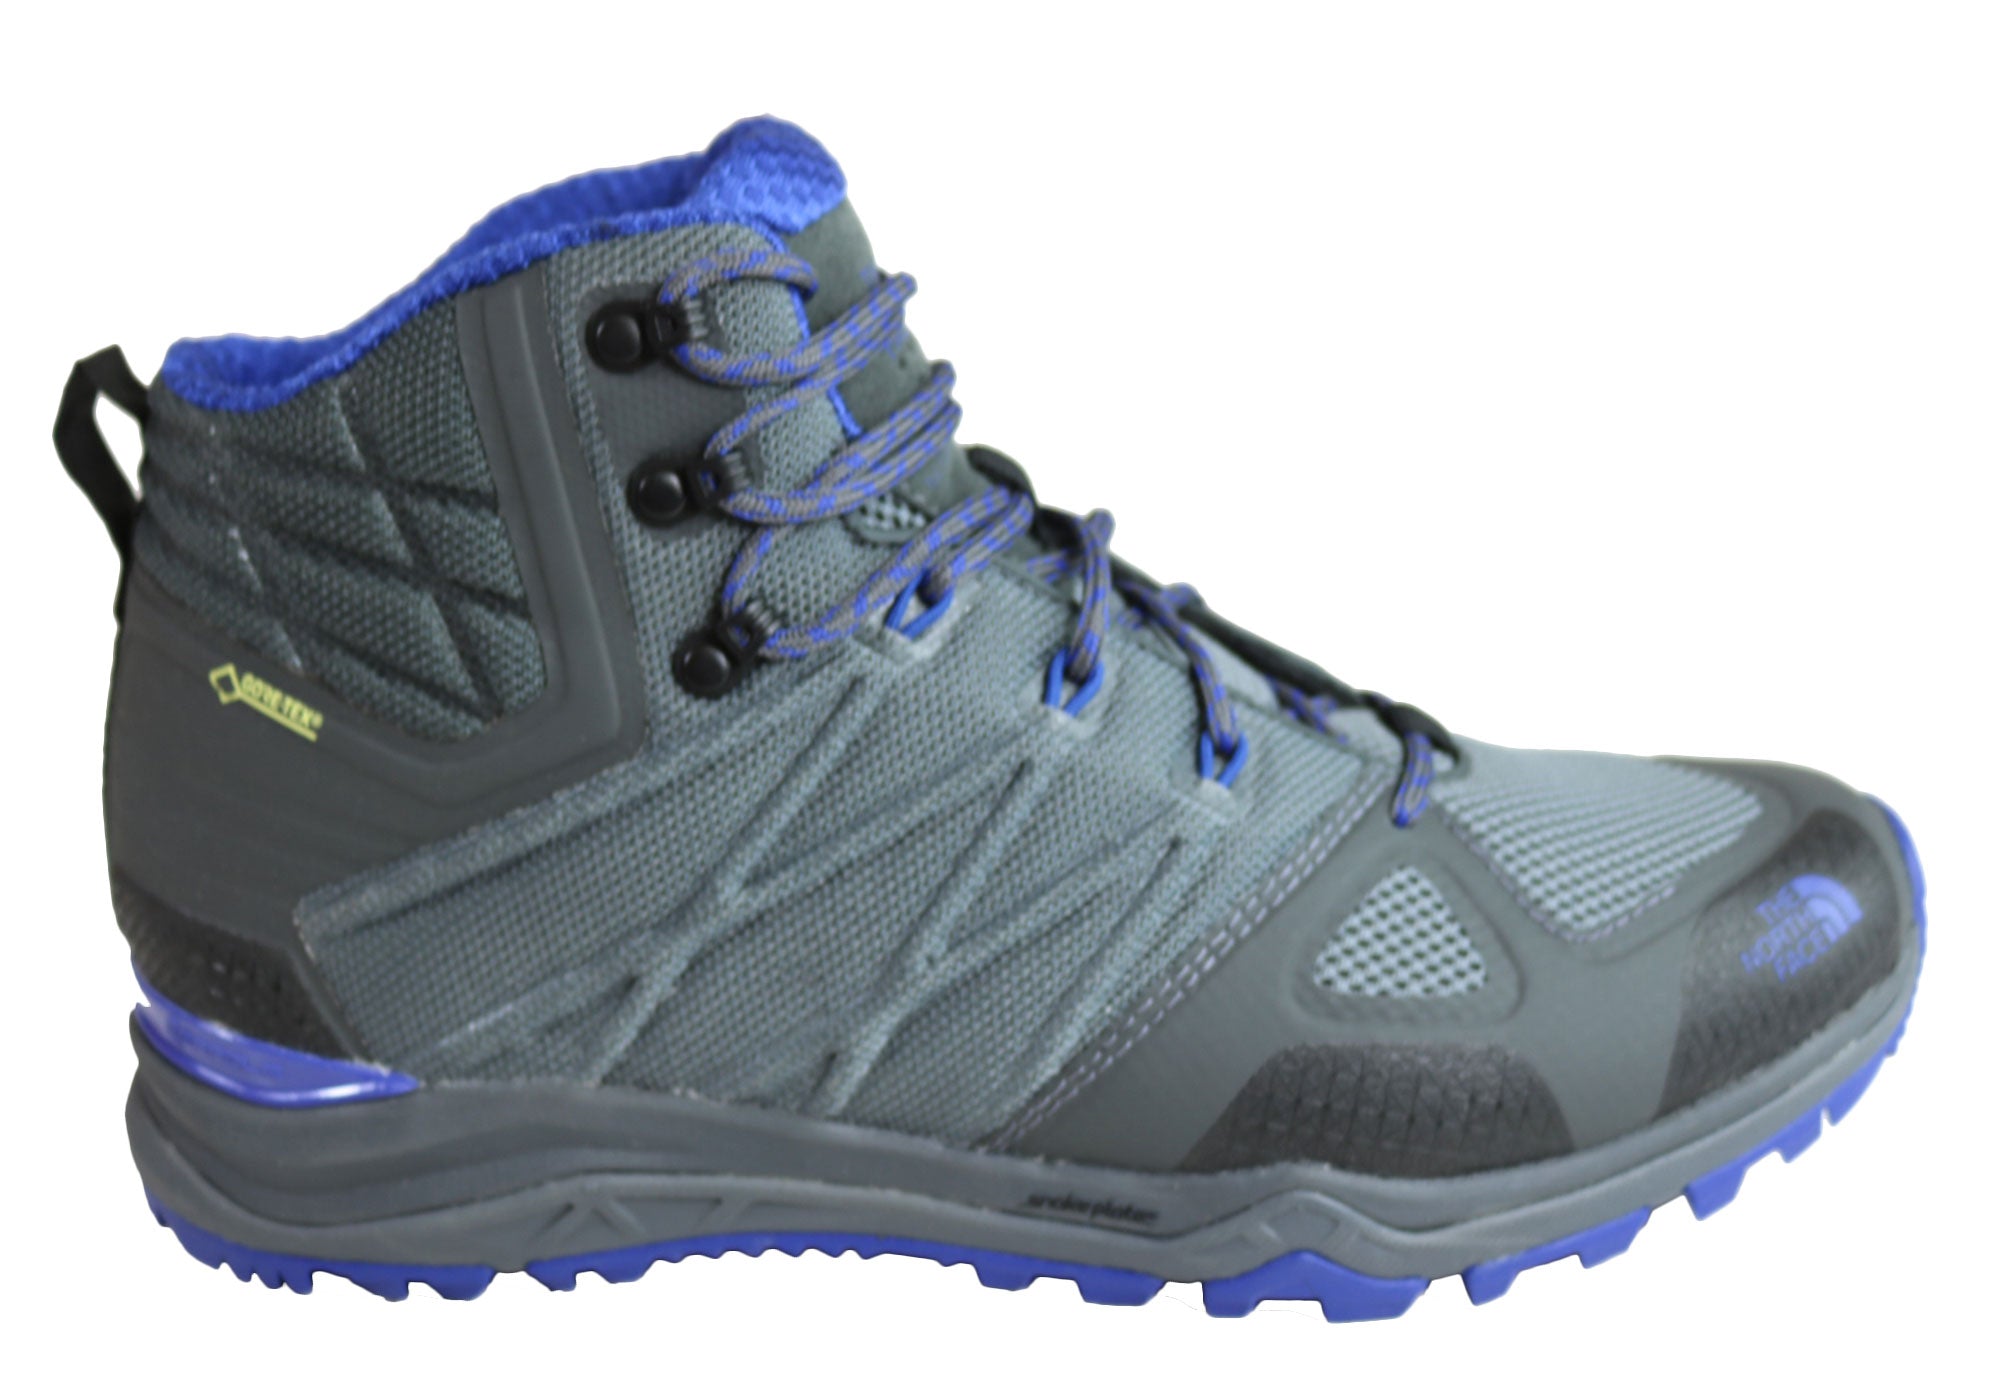 the north face ultra fastpack 2